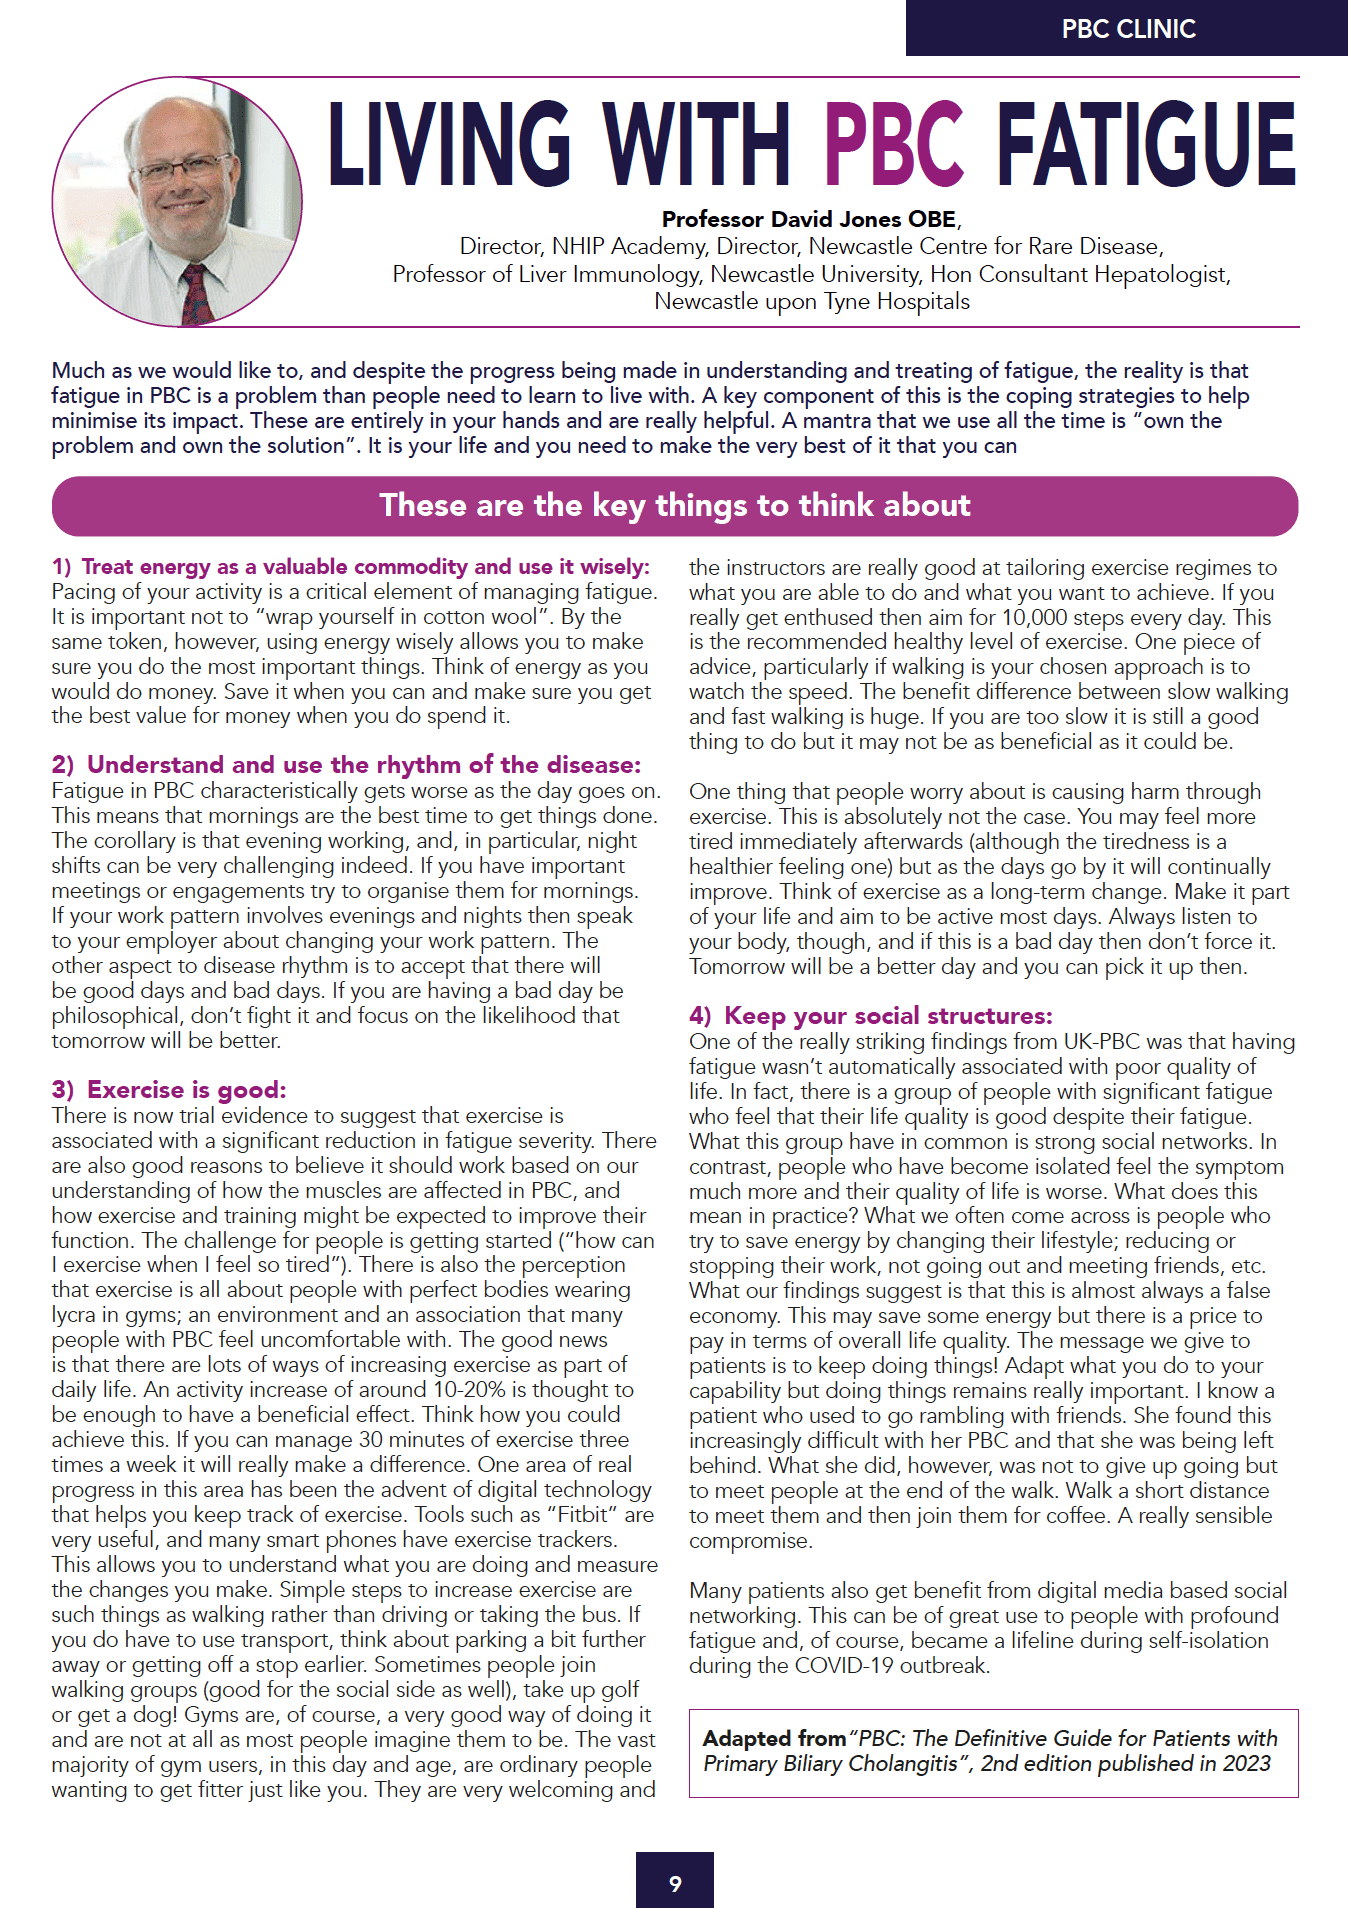 An example page from the PBC Foundation Bear Facts magazine, featuring the a PBC Clinic article about living with PBC fatigue by Professor David Jones OBE